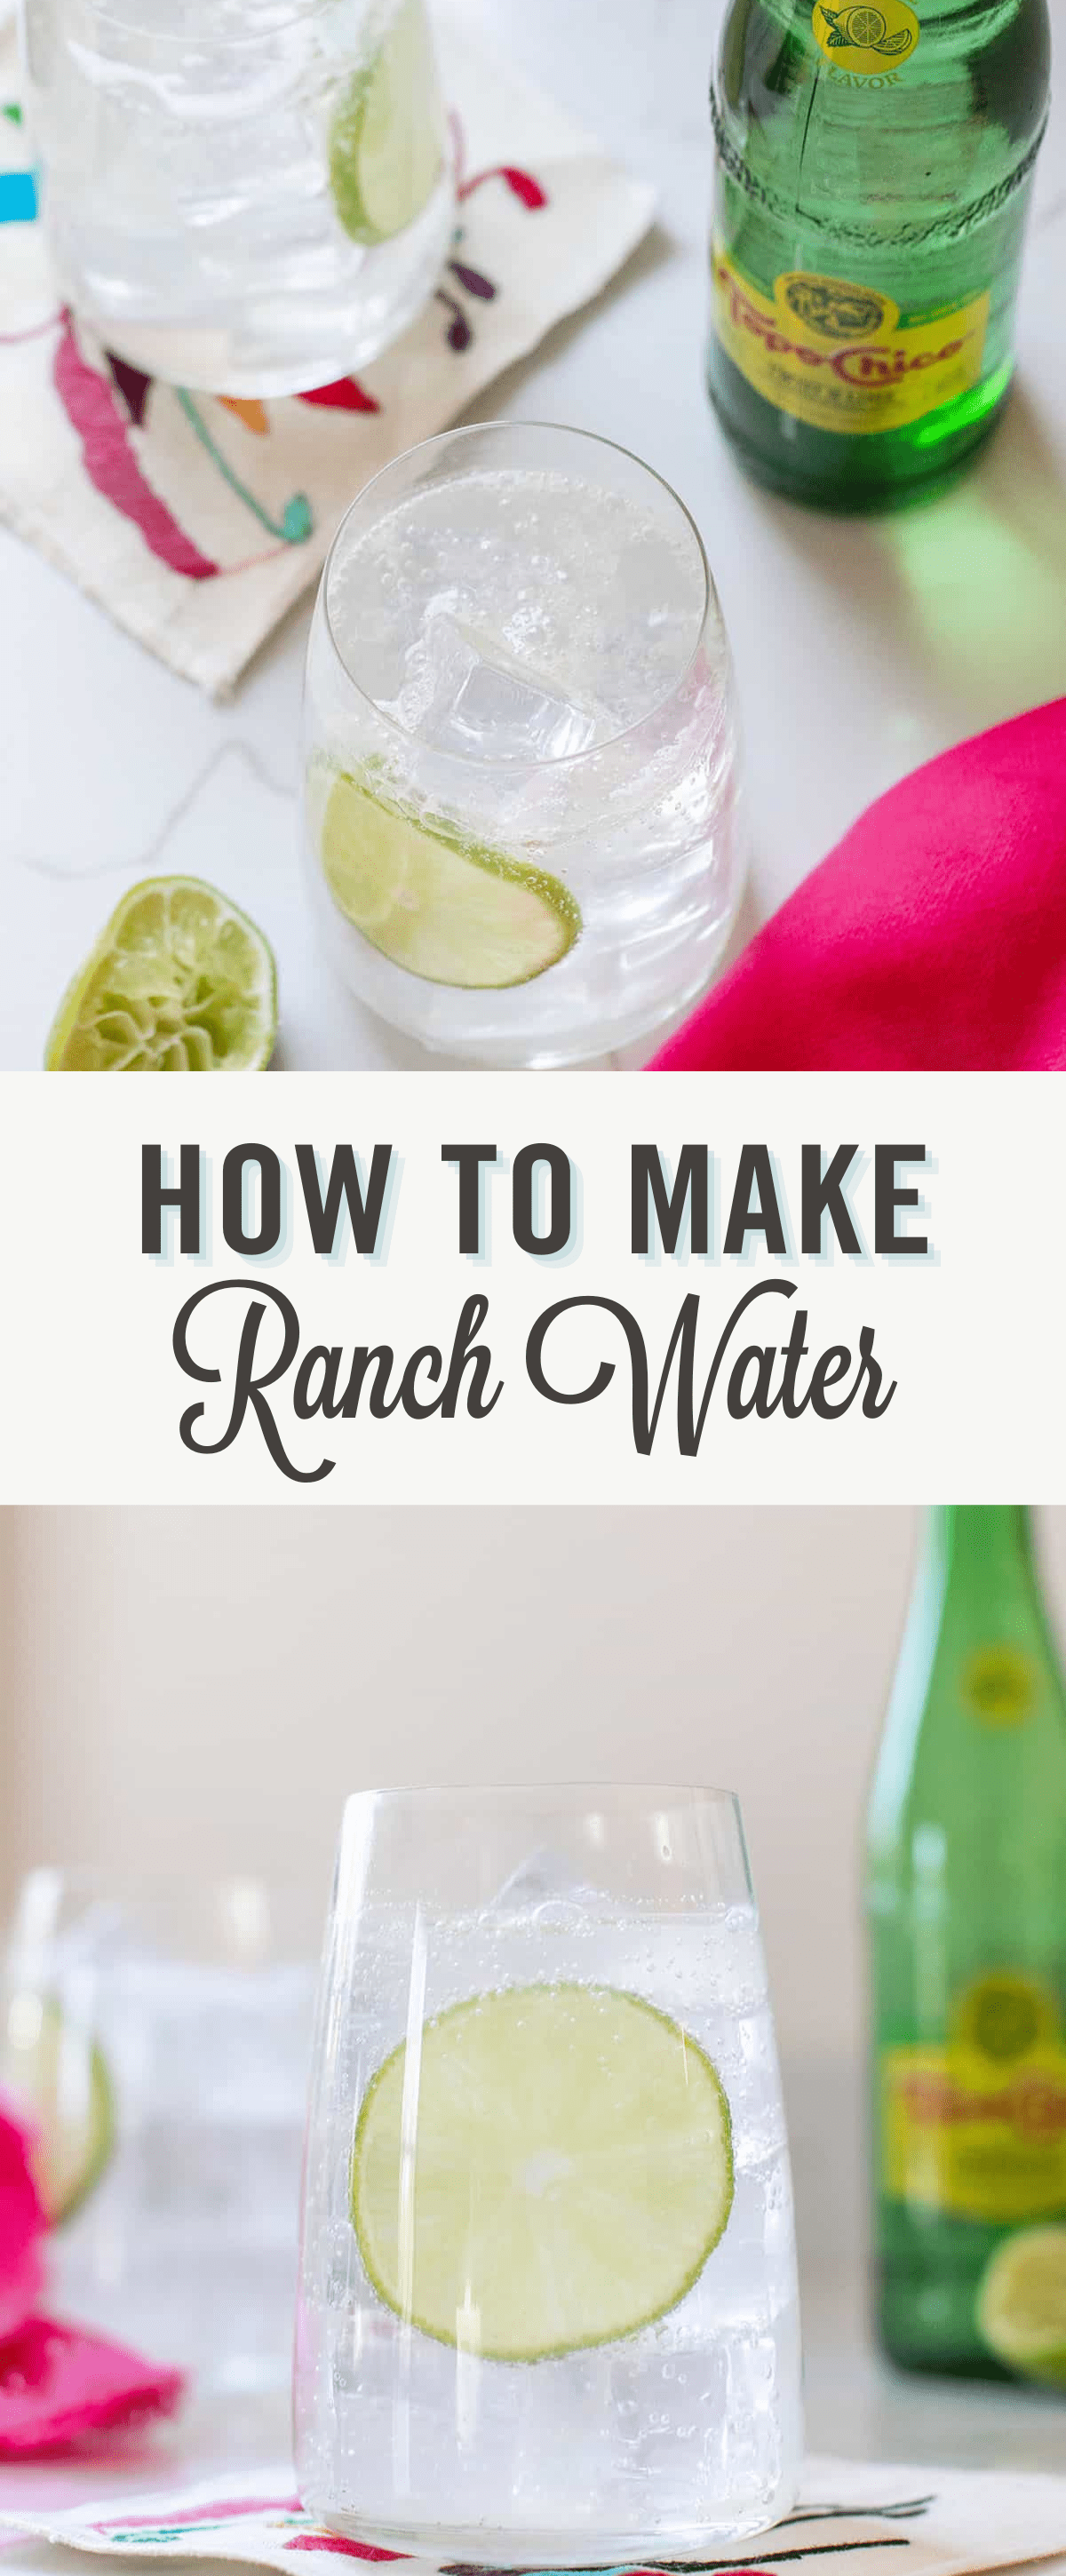 Ranch water recipe with title.